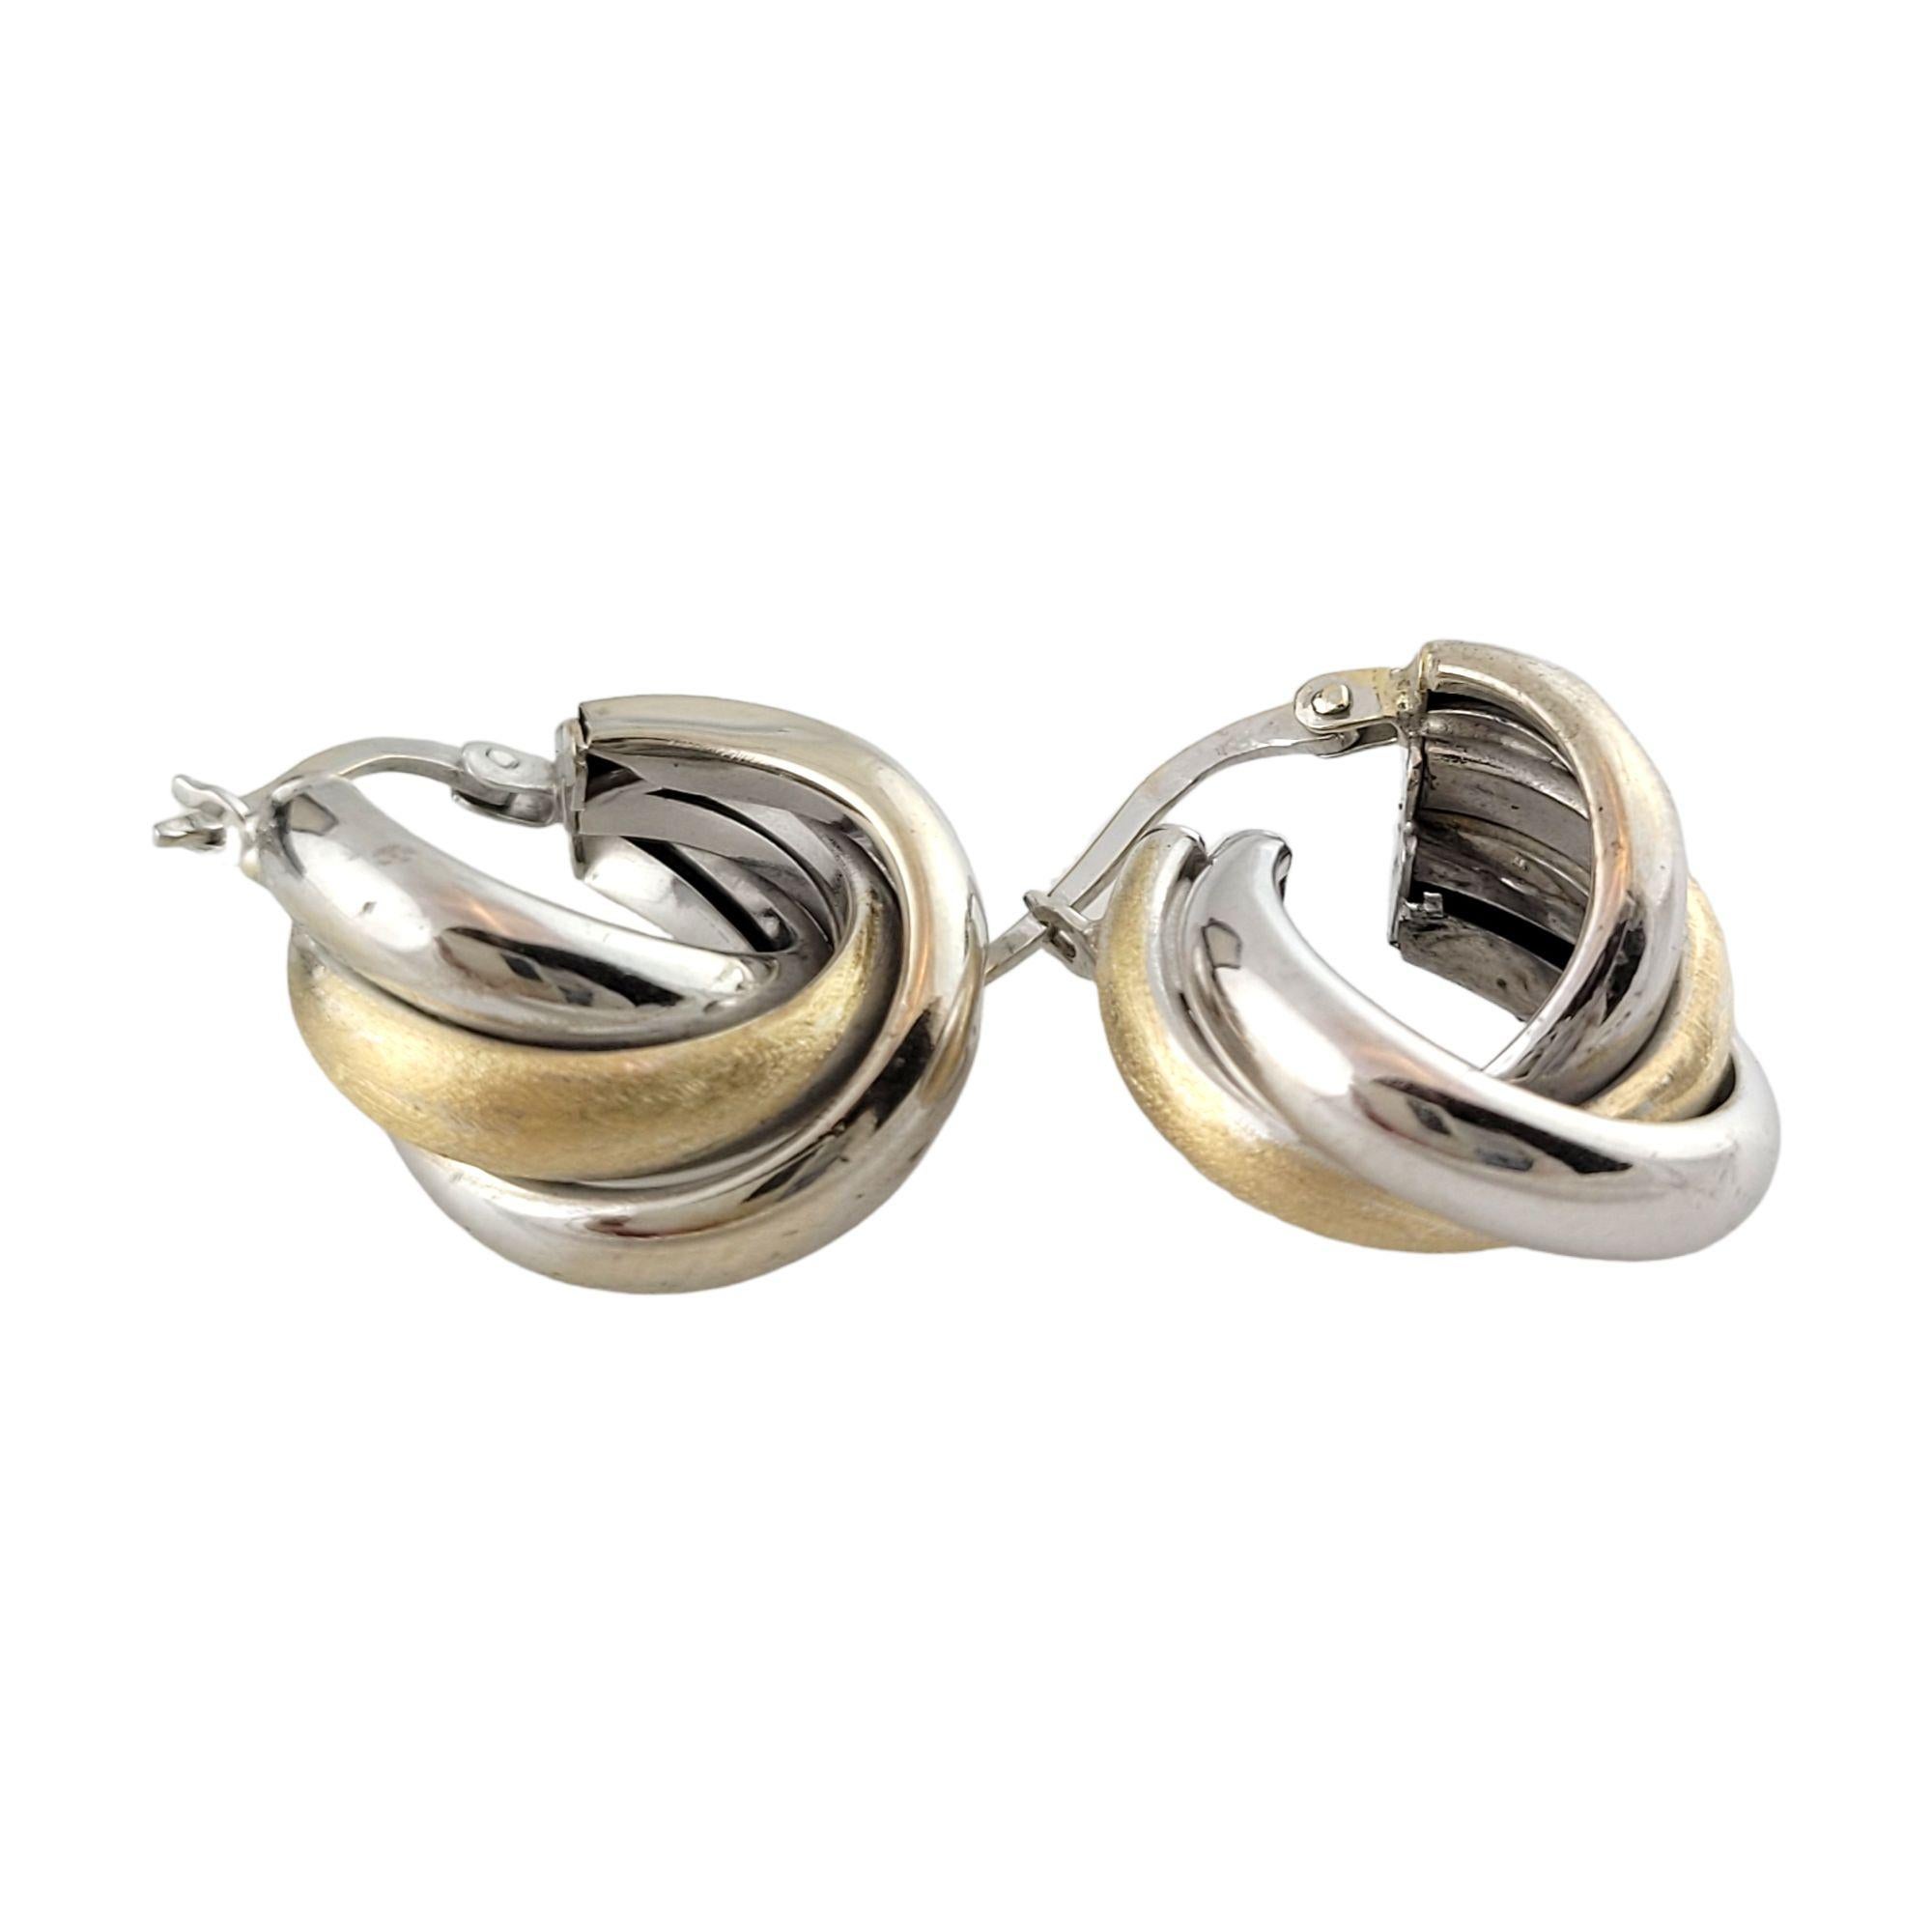 14K White and Yellow Gold 2 Tone 3 Hoop Earrings

This gorgeous pair of 18K gold hoops are made with white and yellow gold and designed with 3 hoops for a unique and beautiful outcome!

Size: 24mm X 20mm X 10mm

Weight: 3.5 g/ 2.2 dwt

Hallmark: